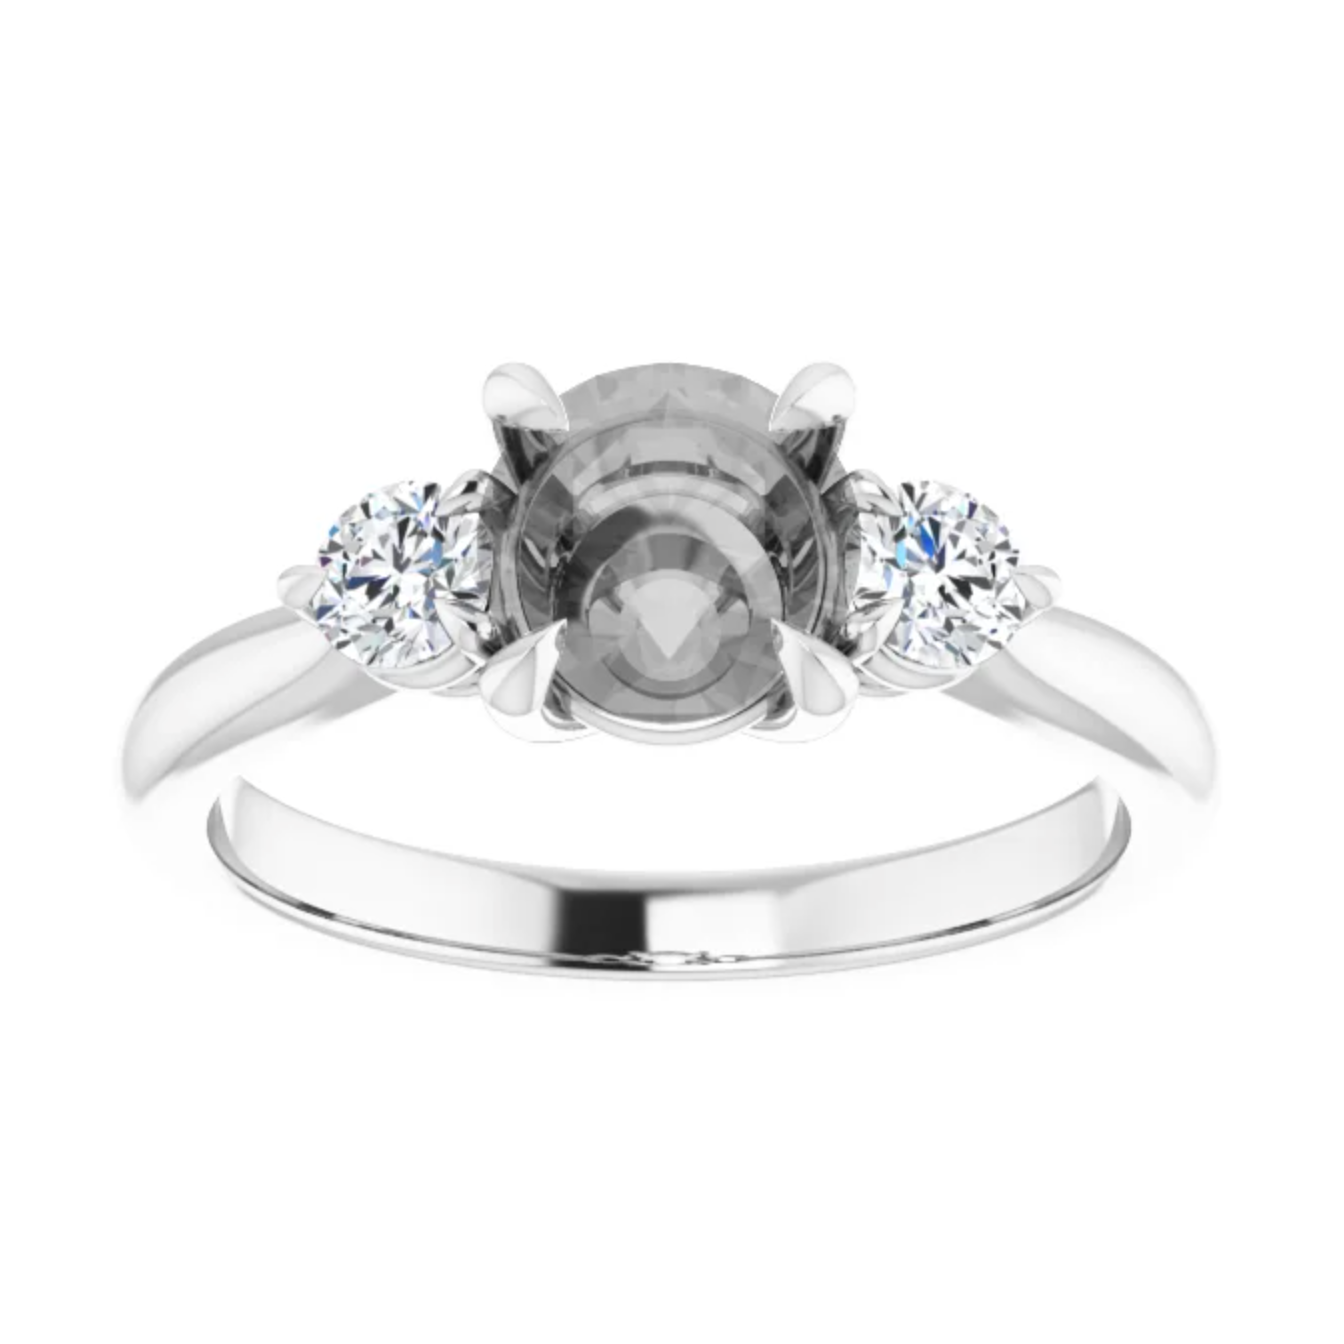 Olive Setting - Midwinter Co. Alternative Bridal Rings and Modern Fine Jewelry